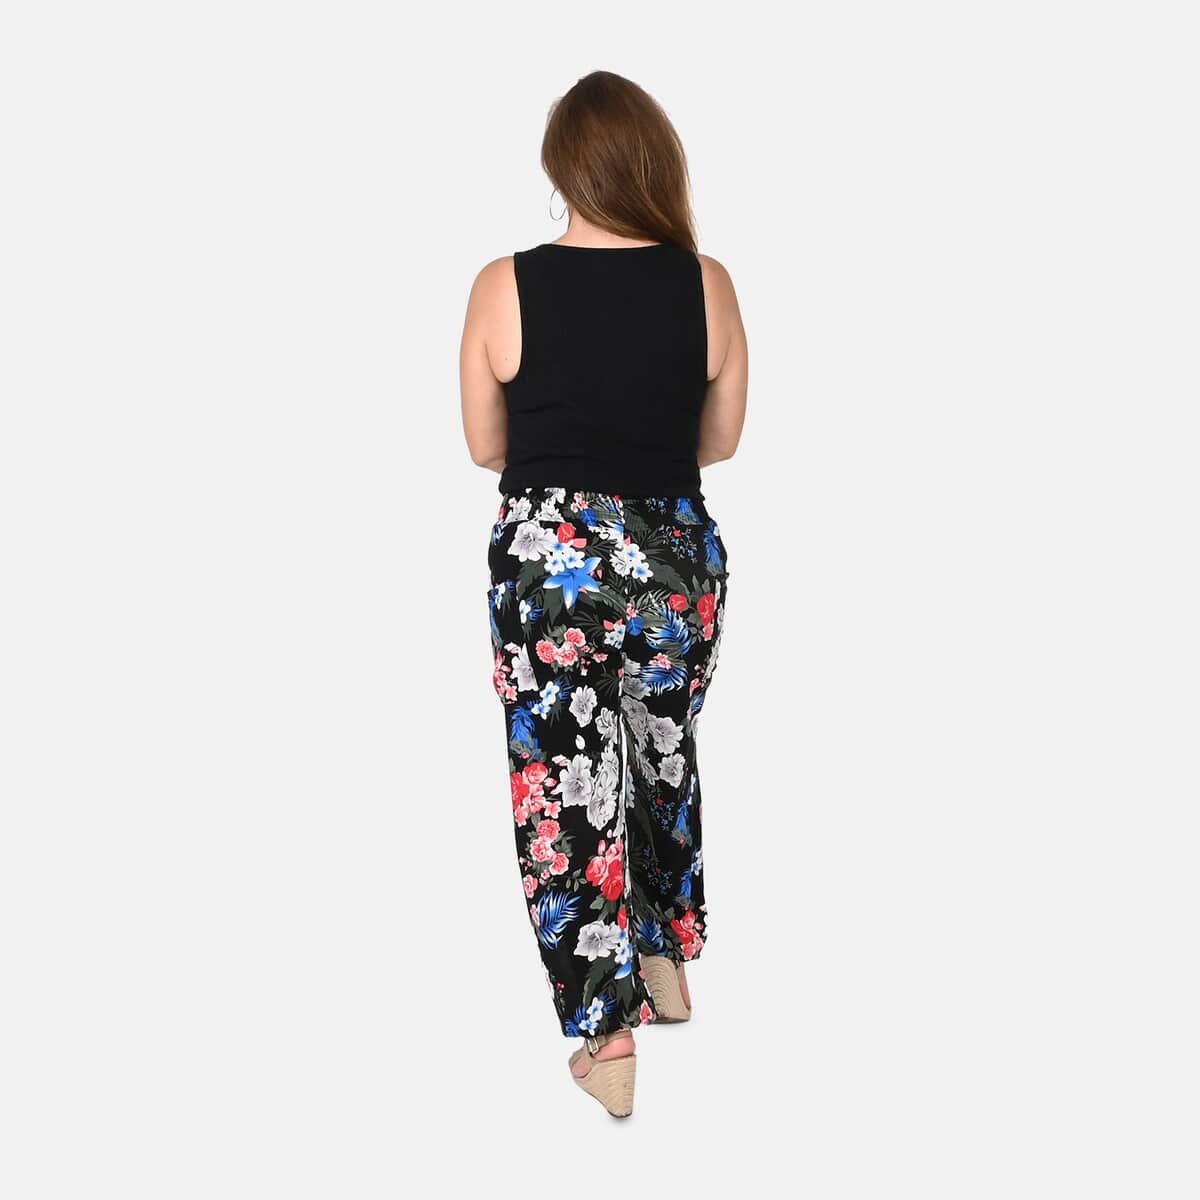 Tamsy Black Rose Smocked Waist Harem Pant with 2 Pockets - One Size Fits Most image number 1